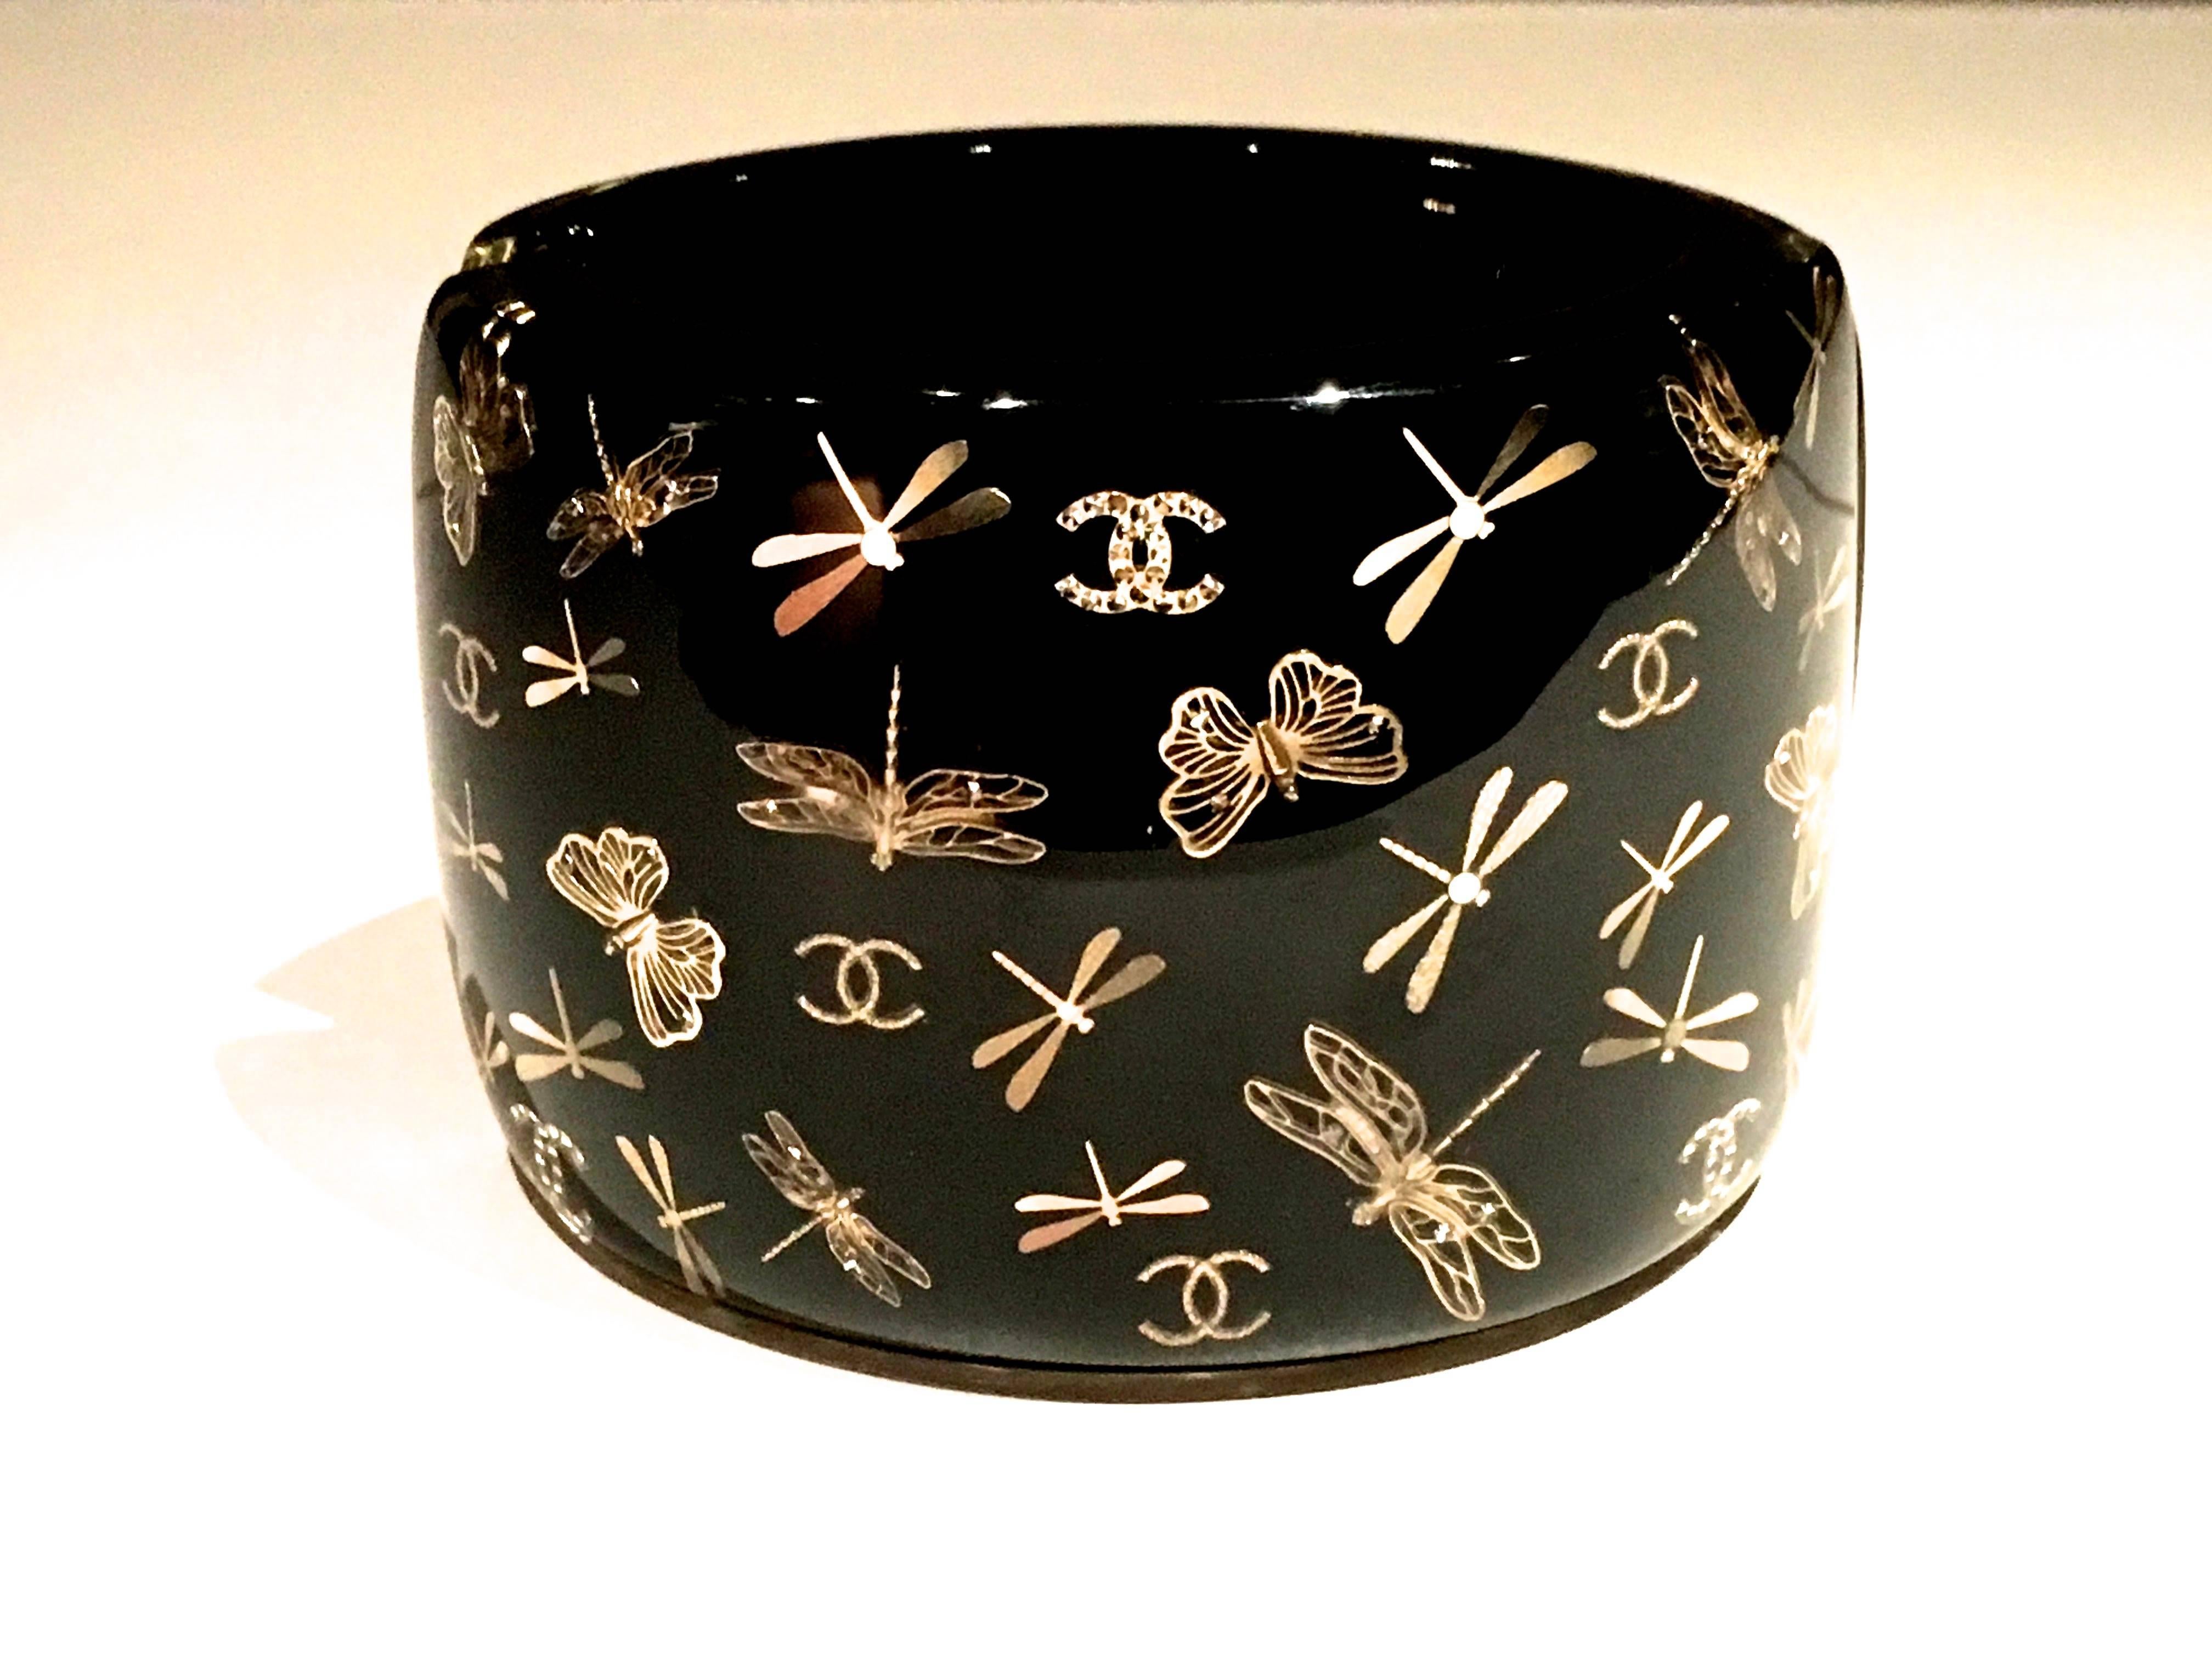 Presented here is a stunning lucite cuff bracelet from Chanel. The magnificent bracelet is made of a combination of black and translucent lucite. Inside the translucent lucite, there are gold tone charms of dragonflies, butterflies and the iconic